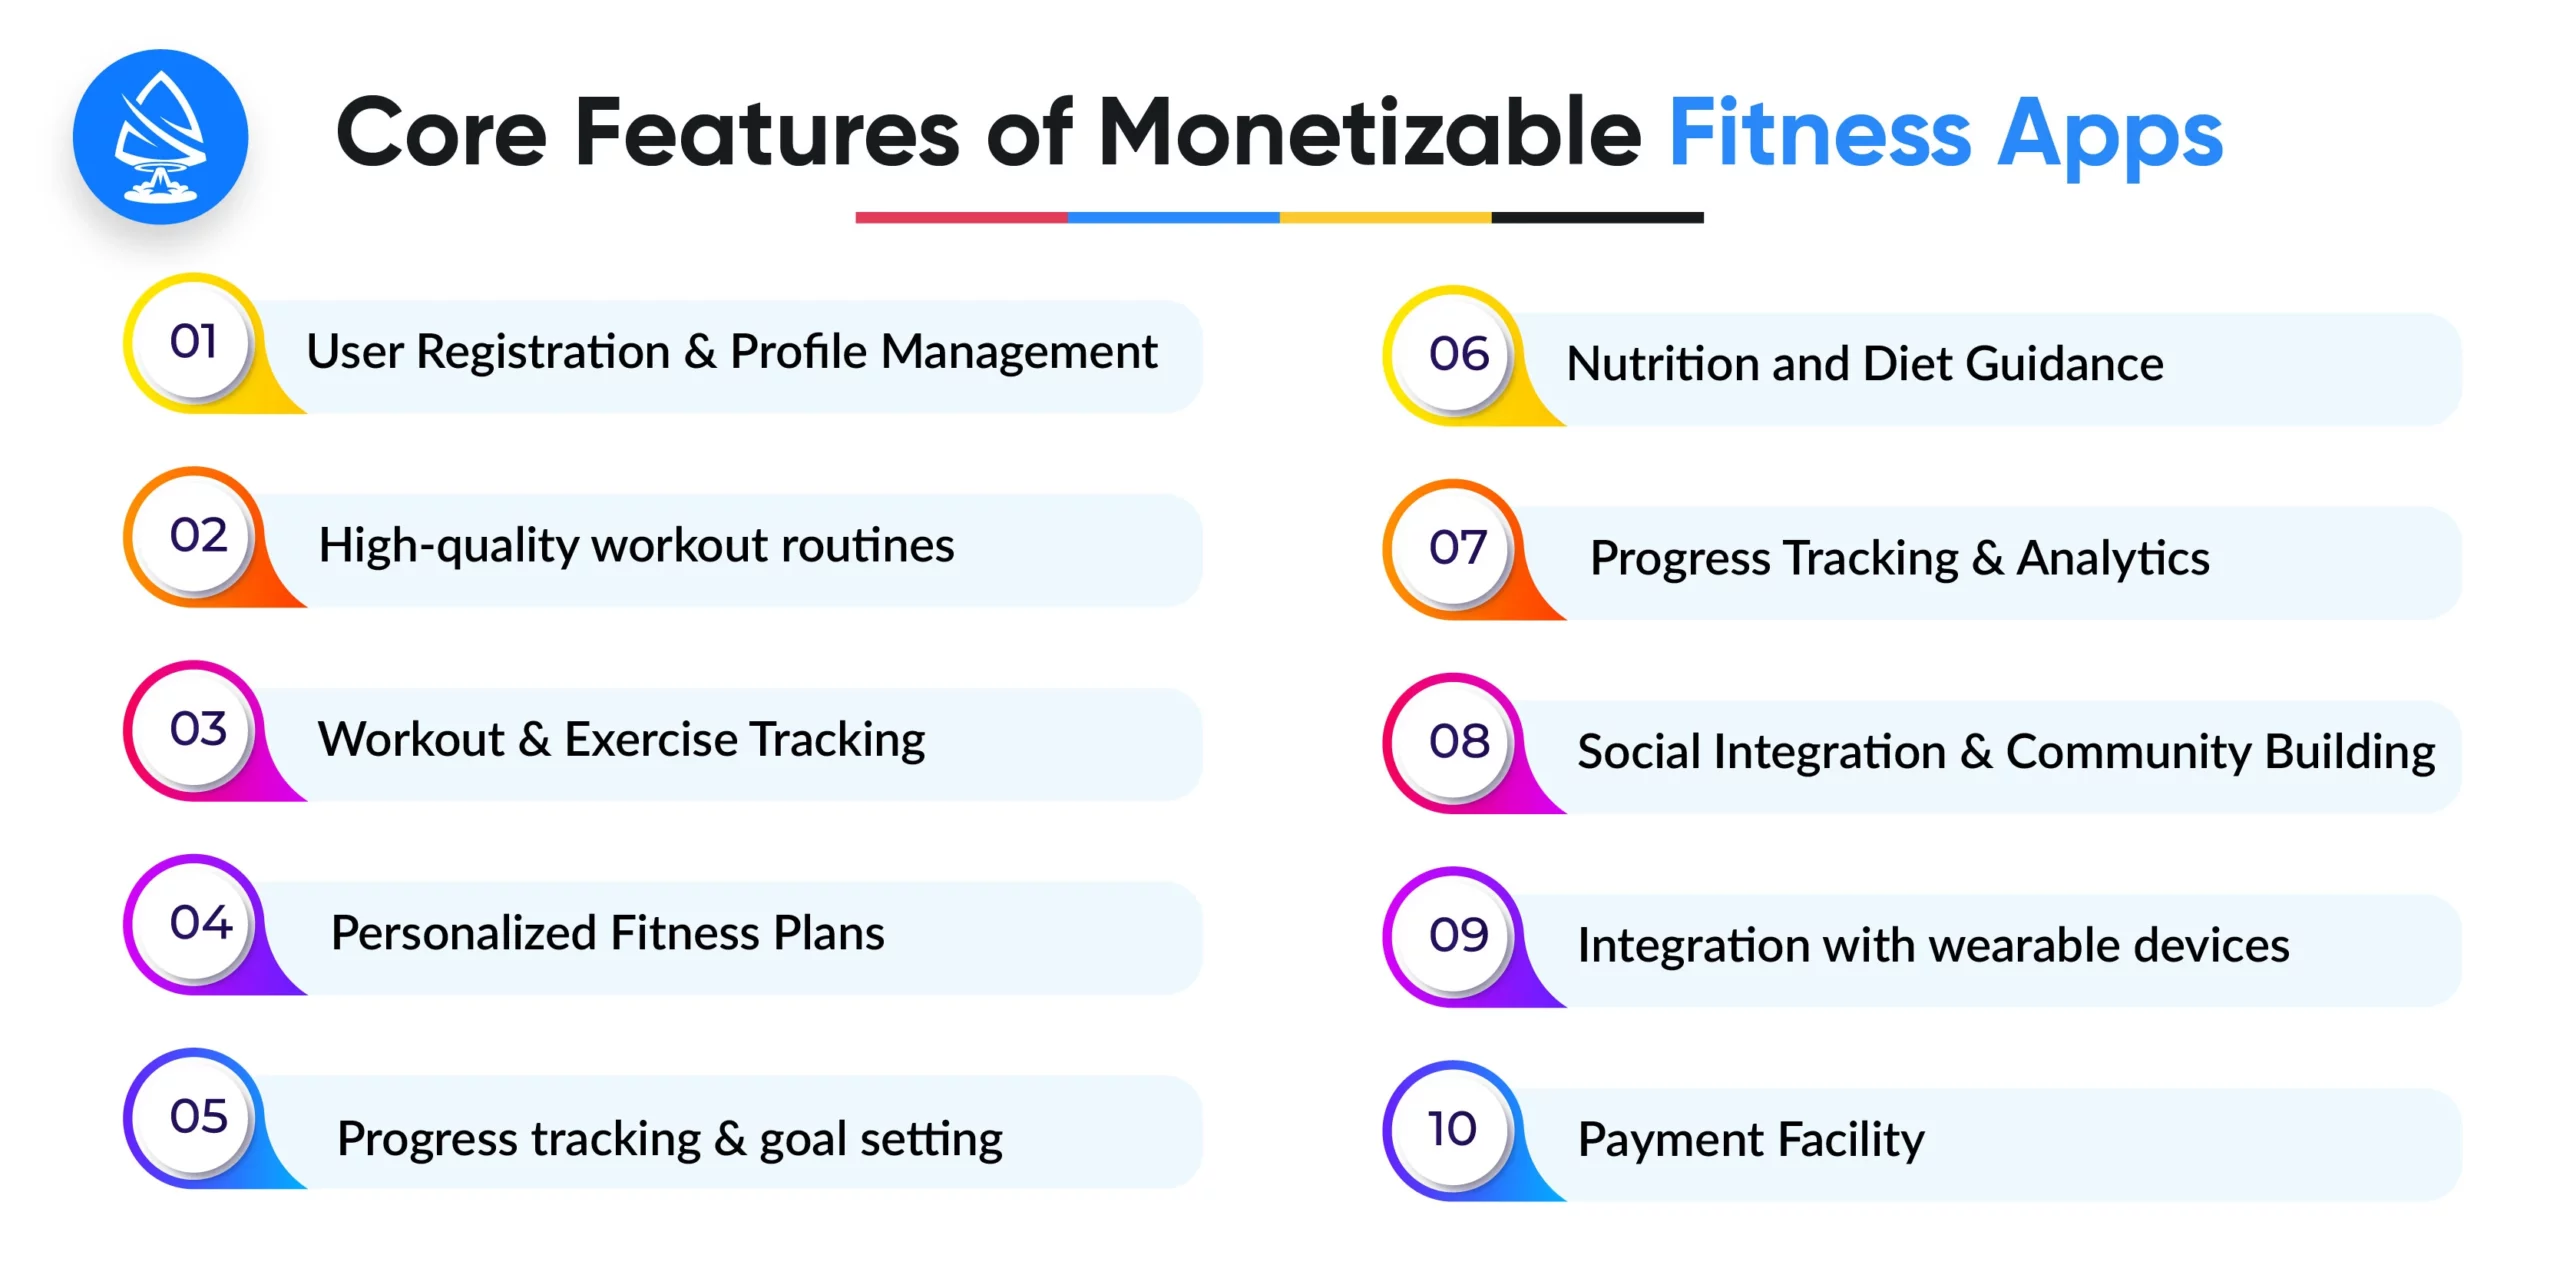 Core Features of Monetizable Fitness Apps